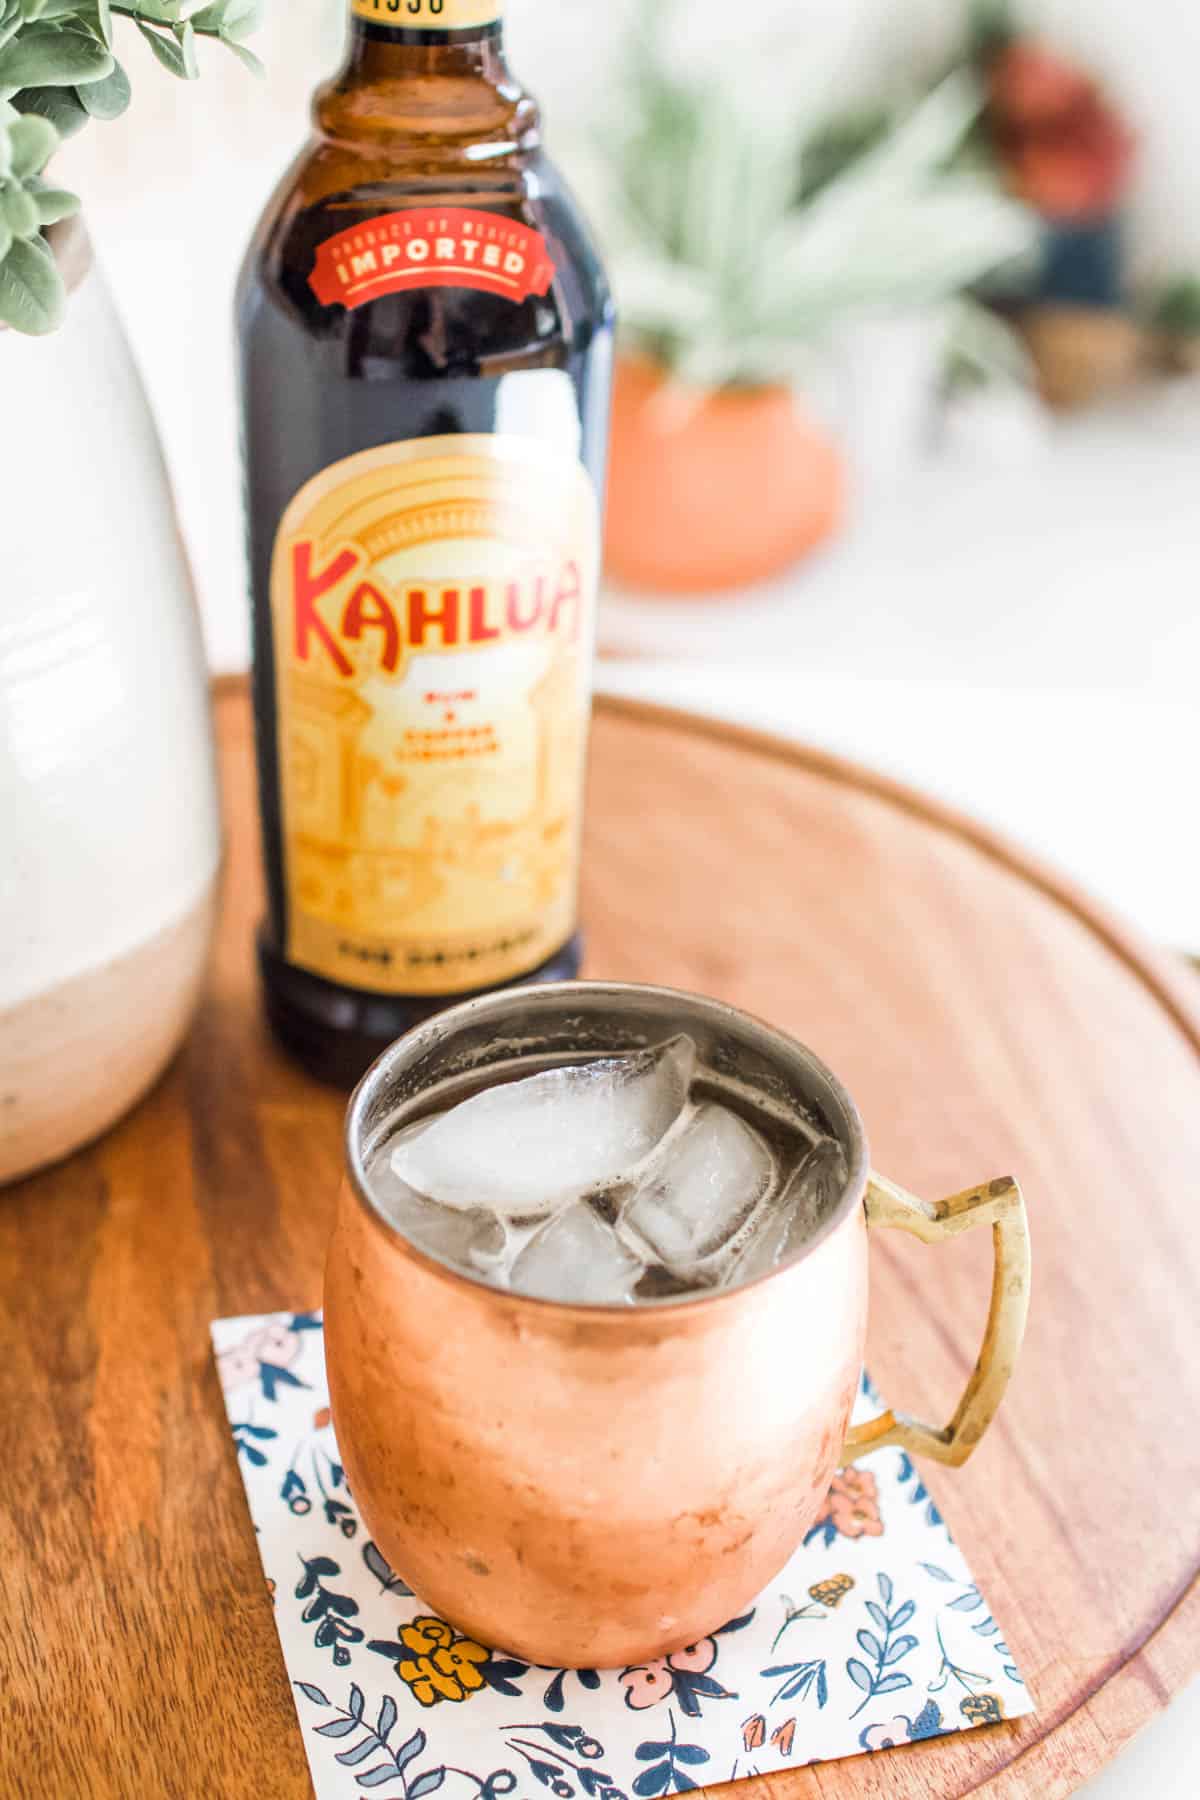 Mexican Mule in a copper mug next to a bottle of Kahlua.